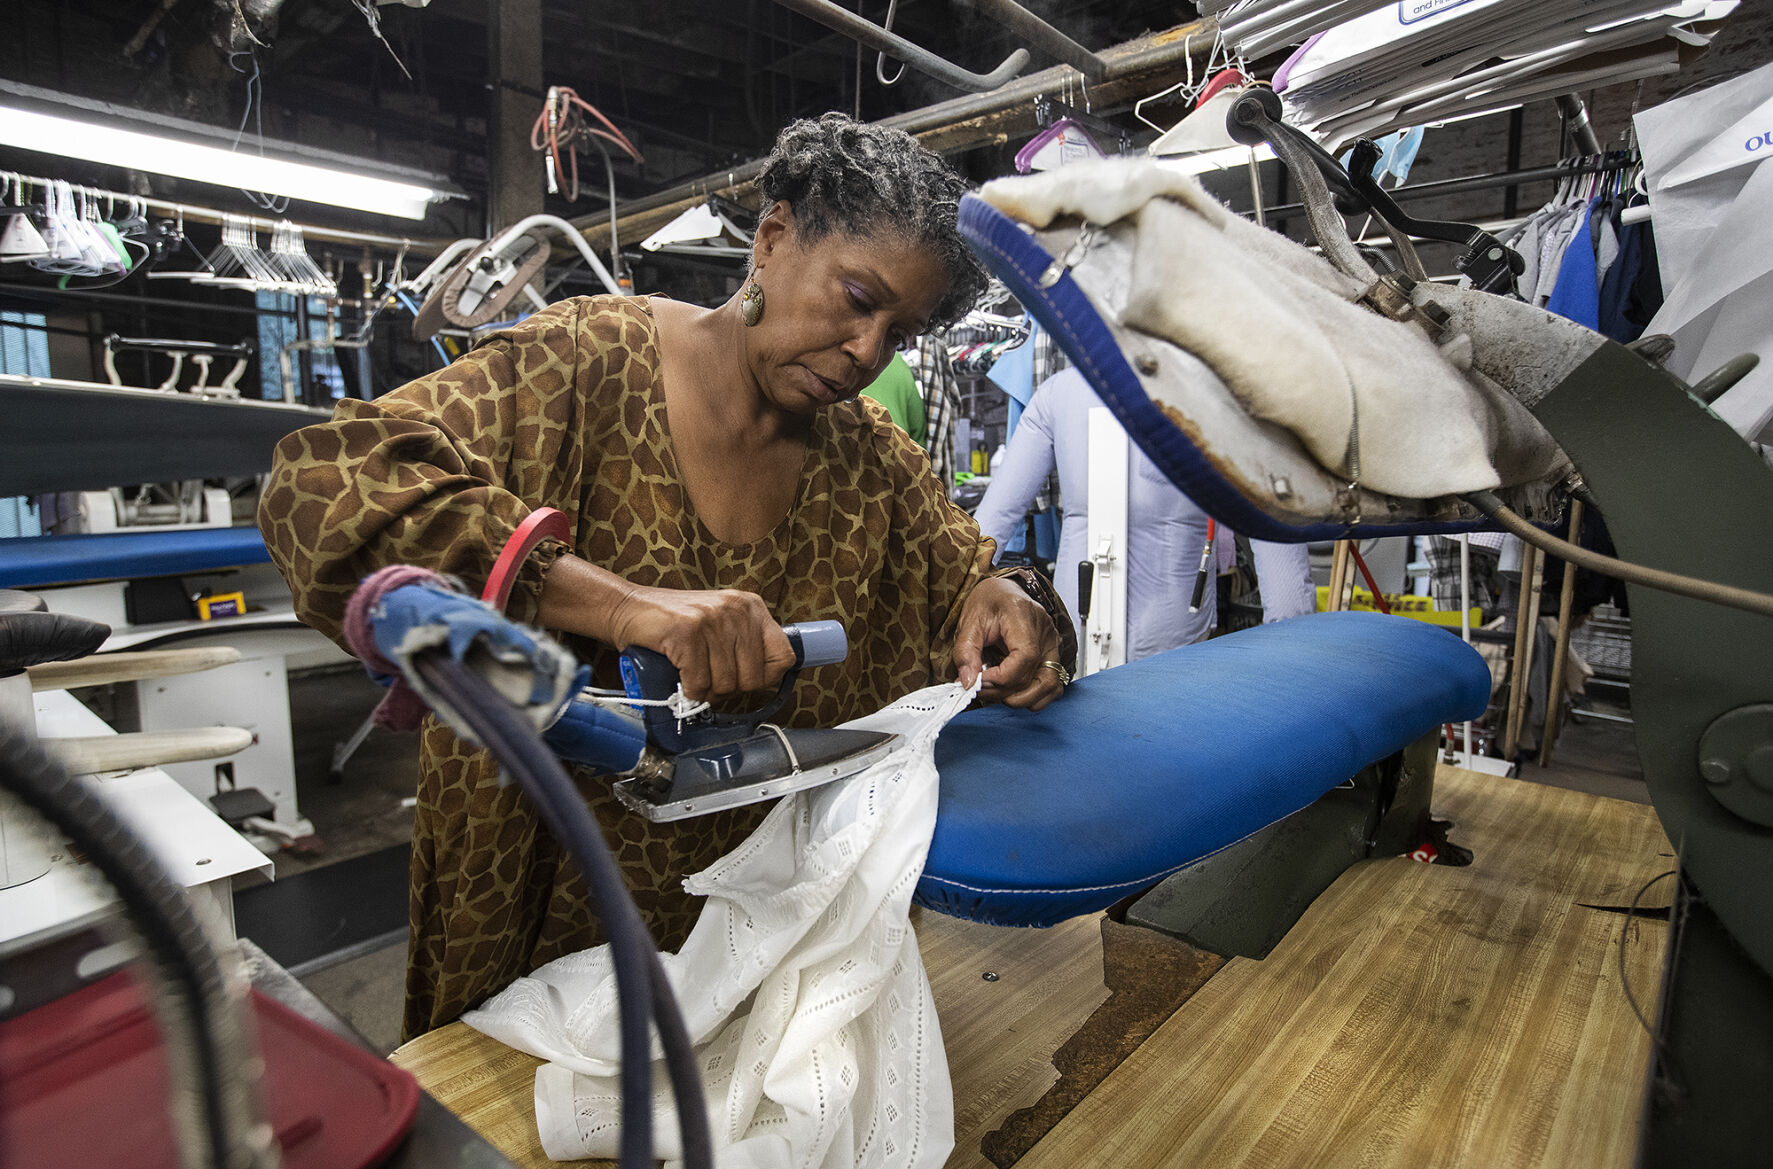 Vivian Bowers, the owner of Bowers & Sons Cleaners, a second-generation dry cleaner in South Los Angeles, irons a shirt. U.S. dry cleaning prices are up 6.9% year over year, higher than the overall inflation of 6.2%.     PHOTO CREDIT: Tribune News Service